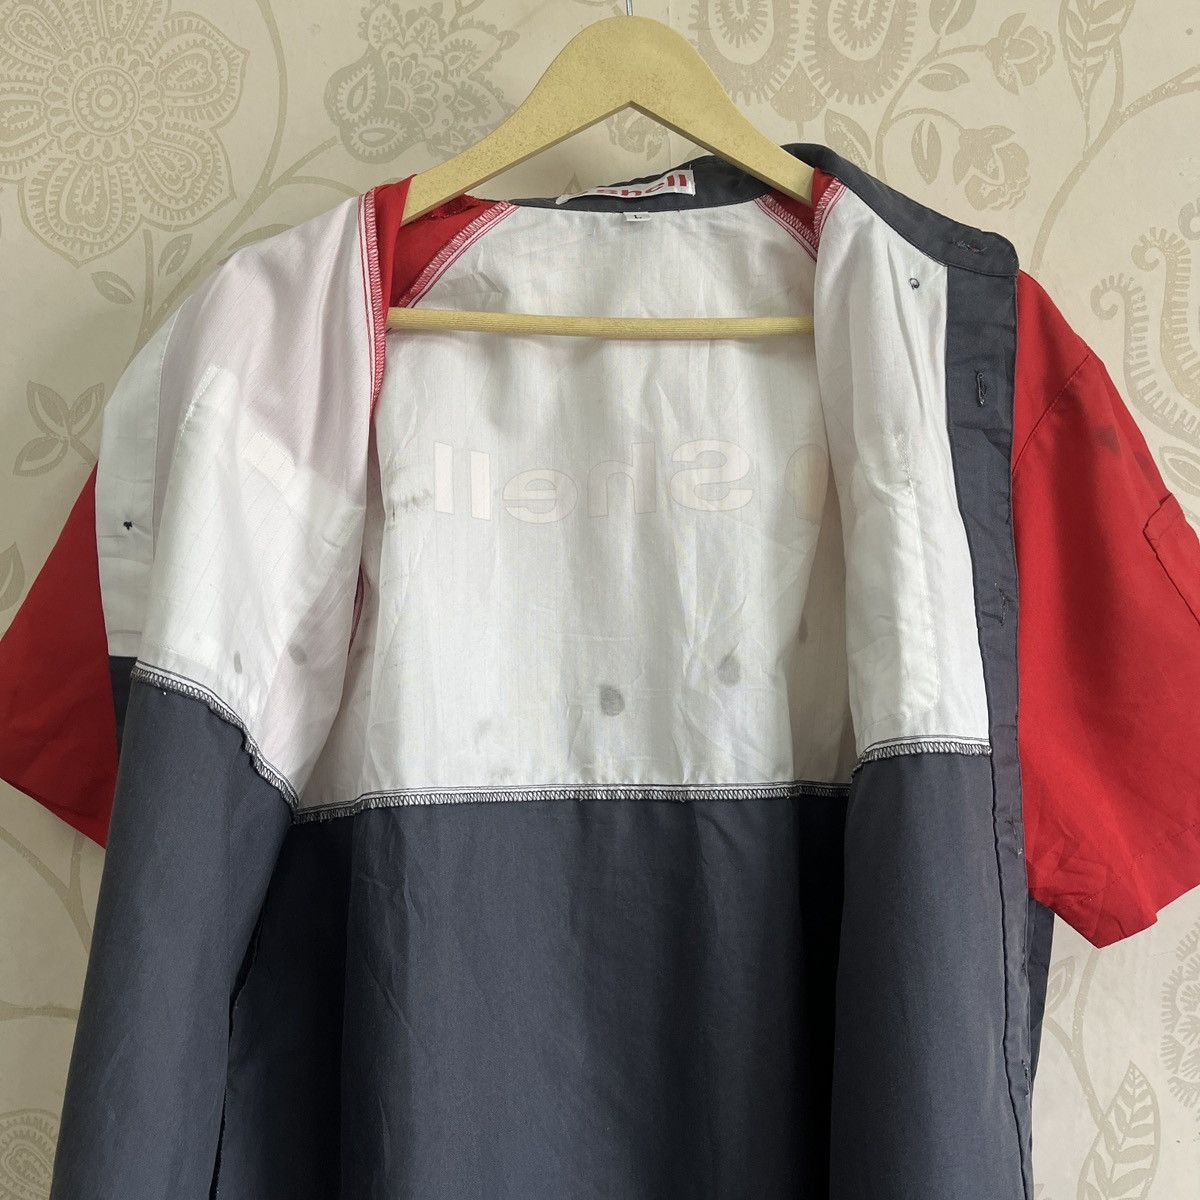 Vintage Shell Workers Uniform Shirts Japan - 15